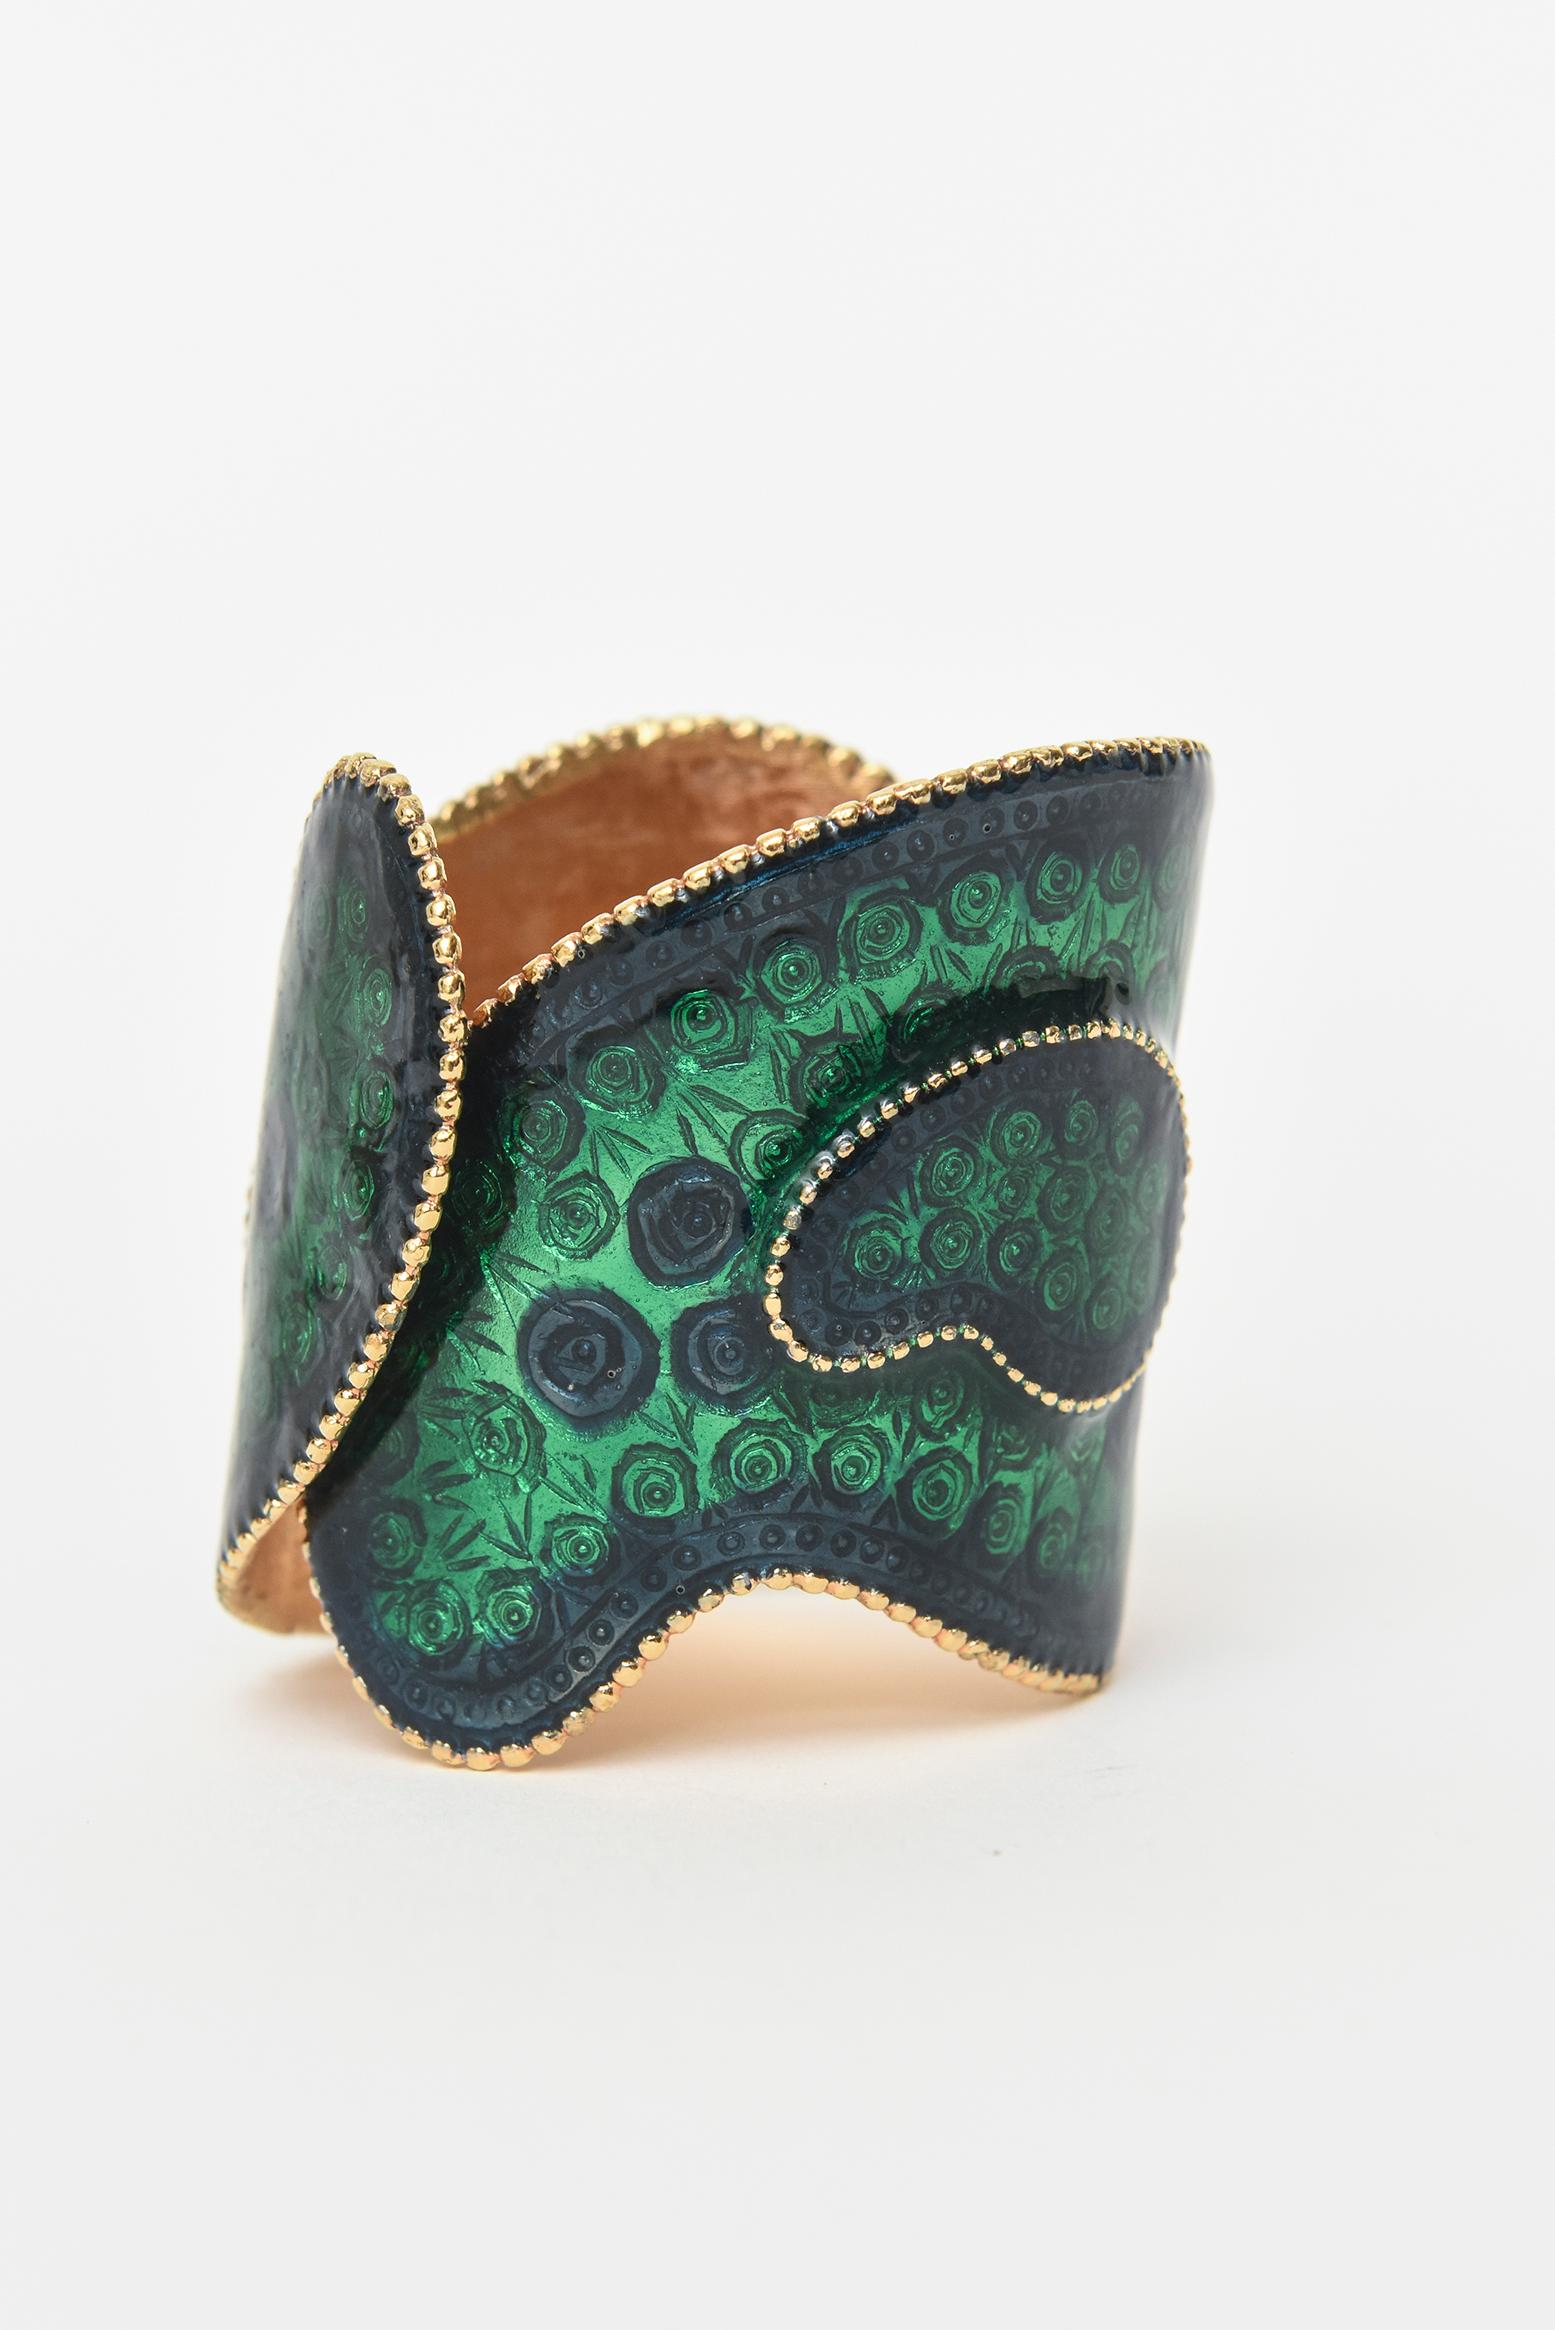 This amazing and rare stunning emerald green with blue hinged 60's cuff bracelet is by Robert and signed. His enamel work on this is very fine. This form of enameling is called guilloche which involves engraving the design onto metal and applying